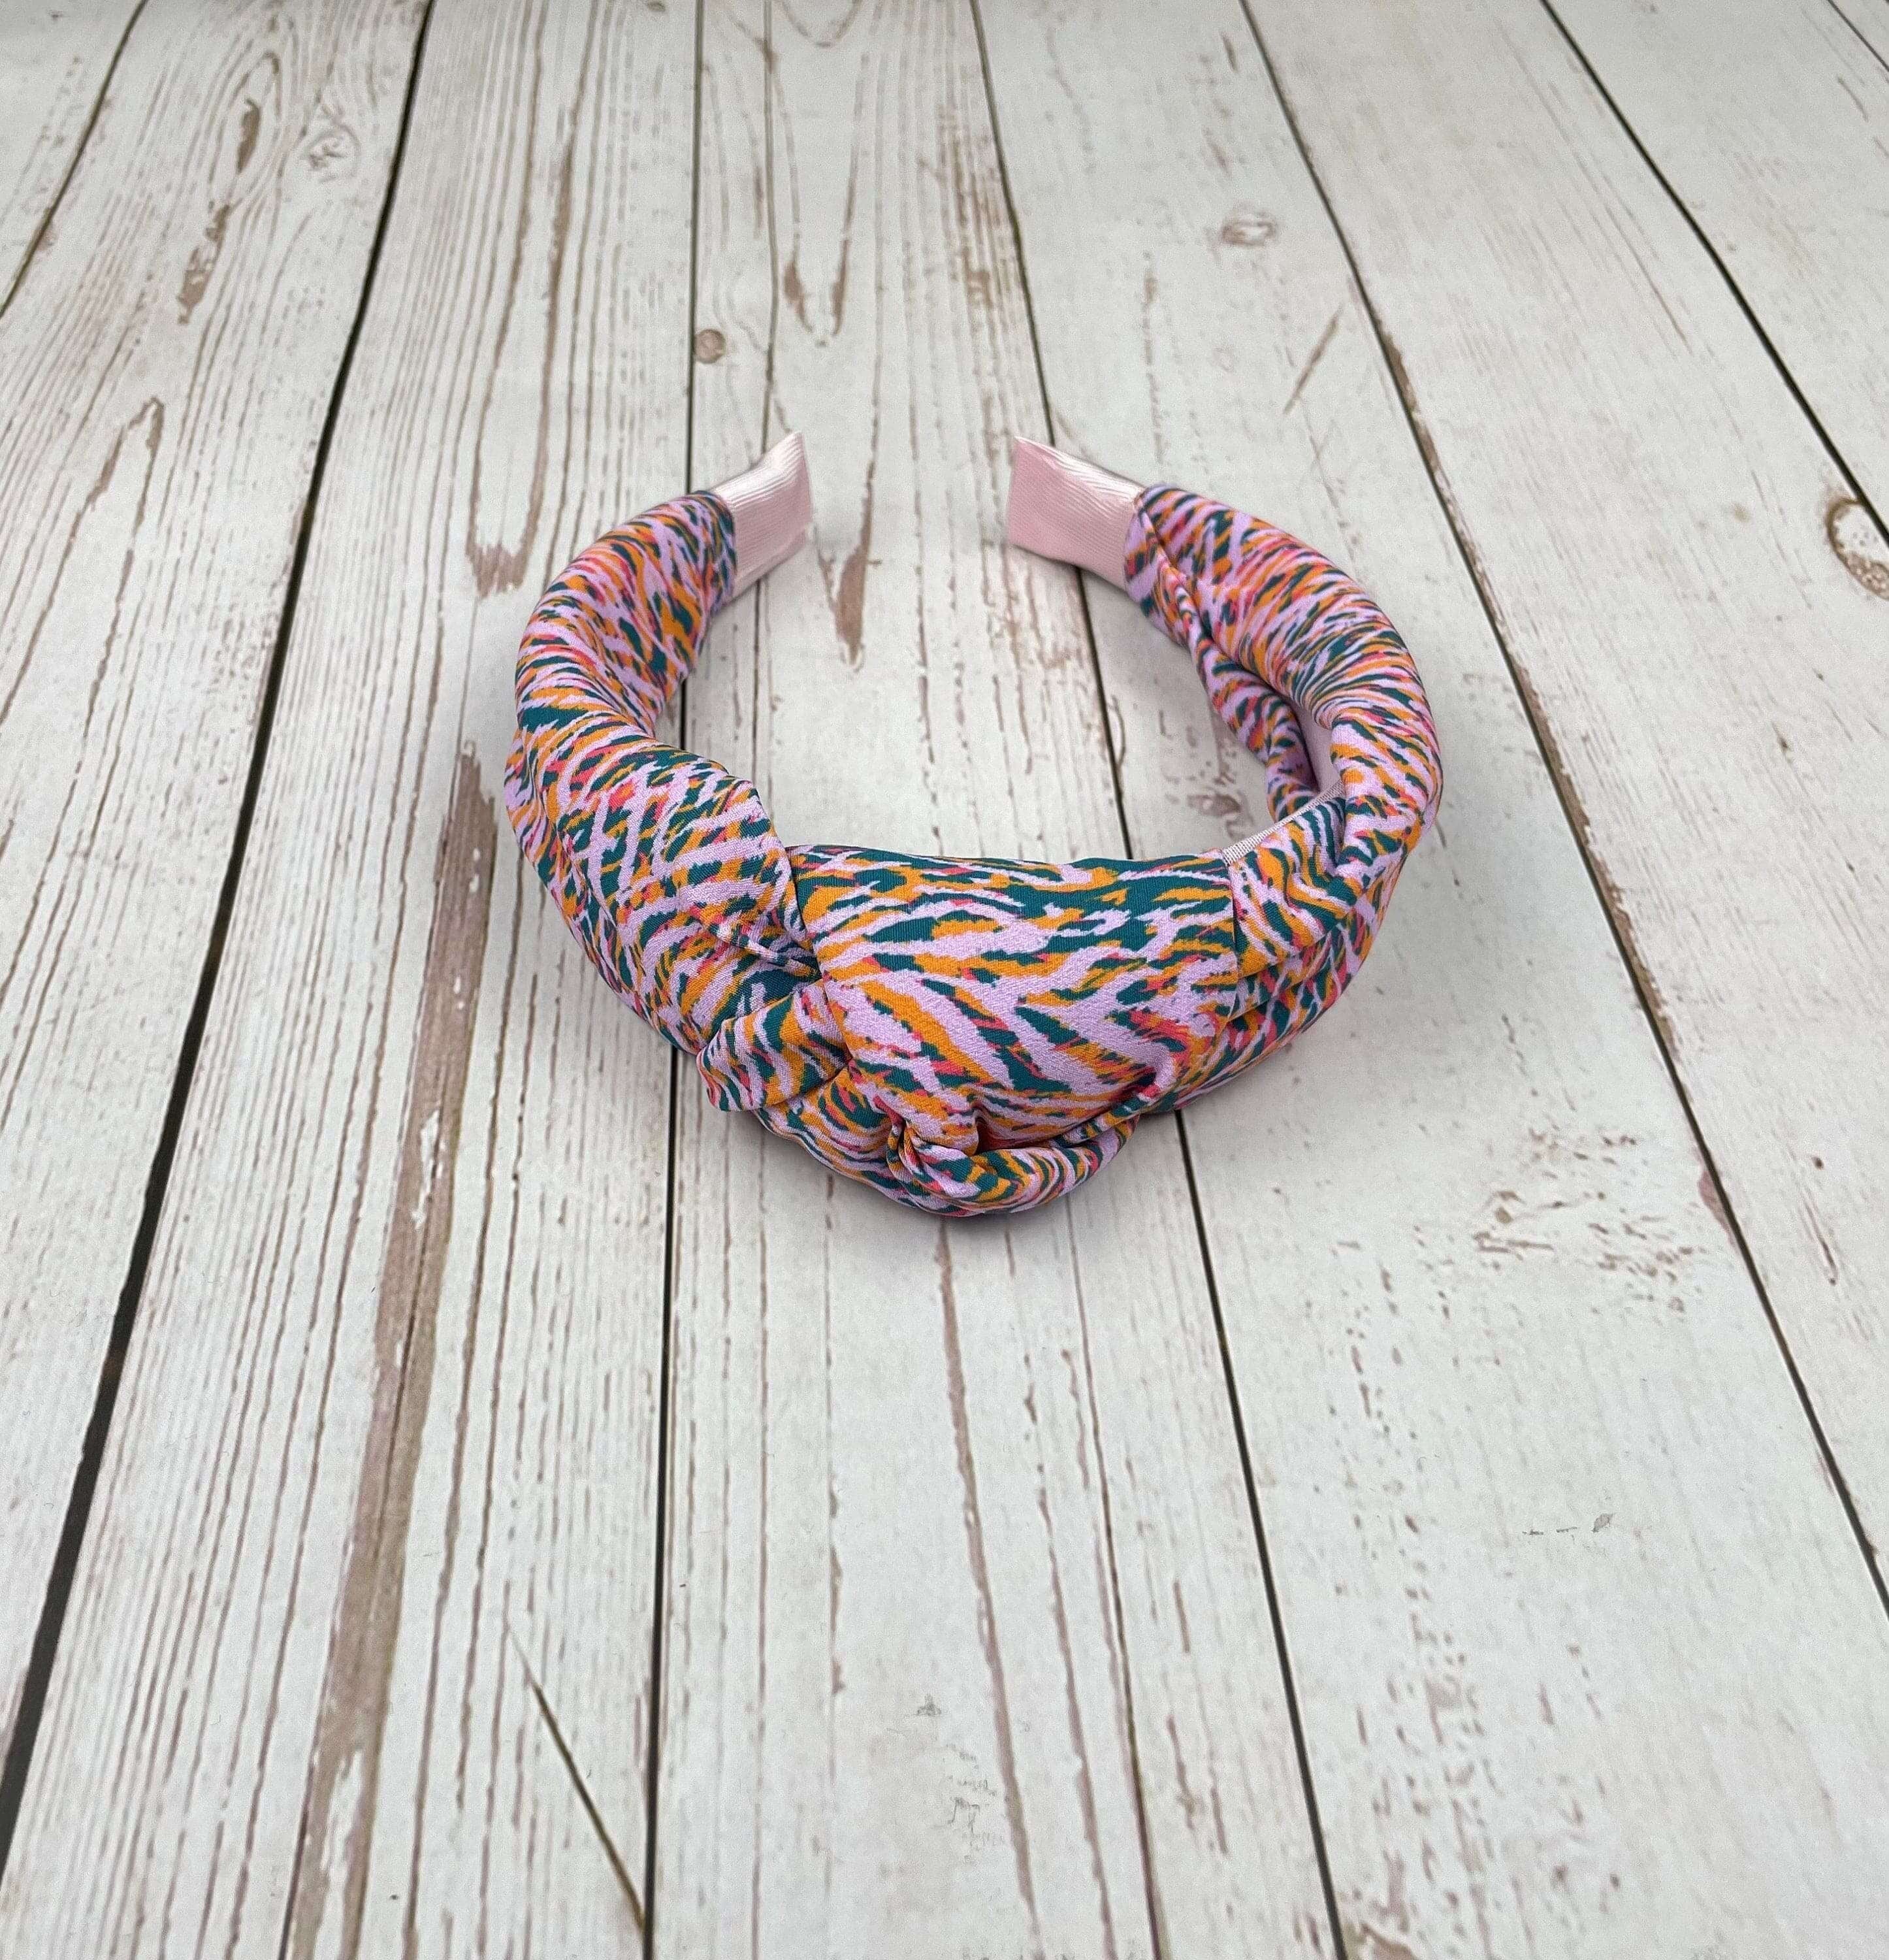 Stay on-trend with this Pink Green Striped Headband, featuring a colorful leopard pattern